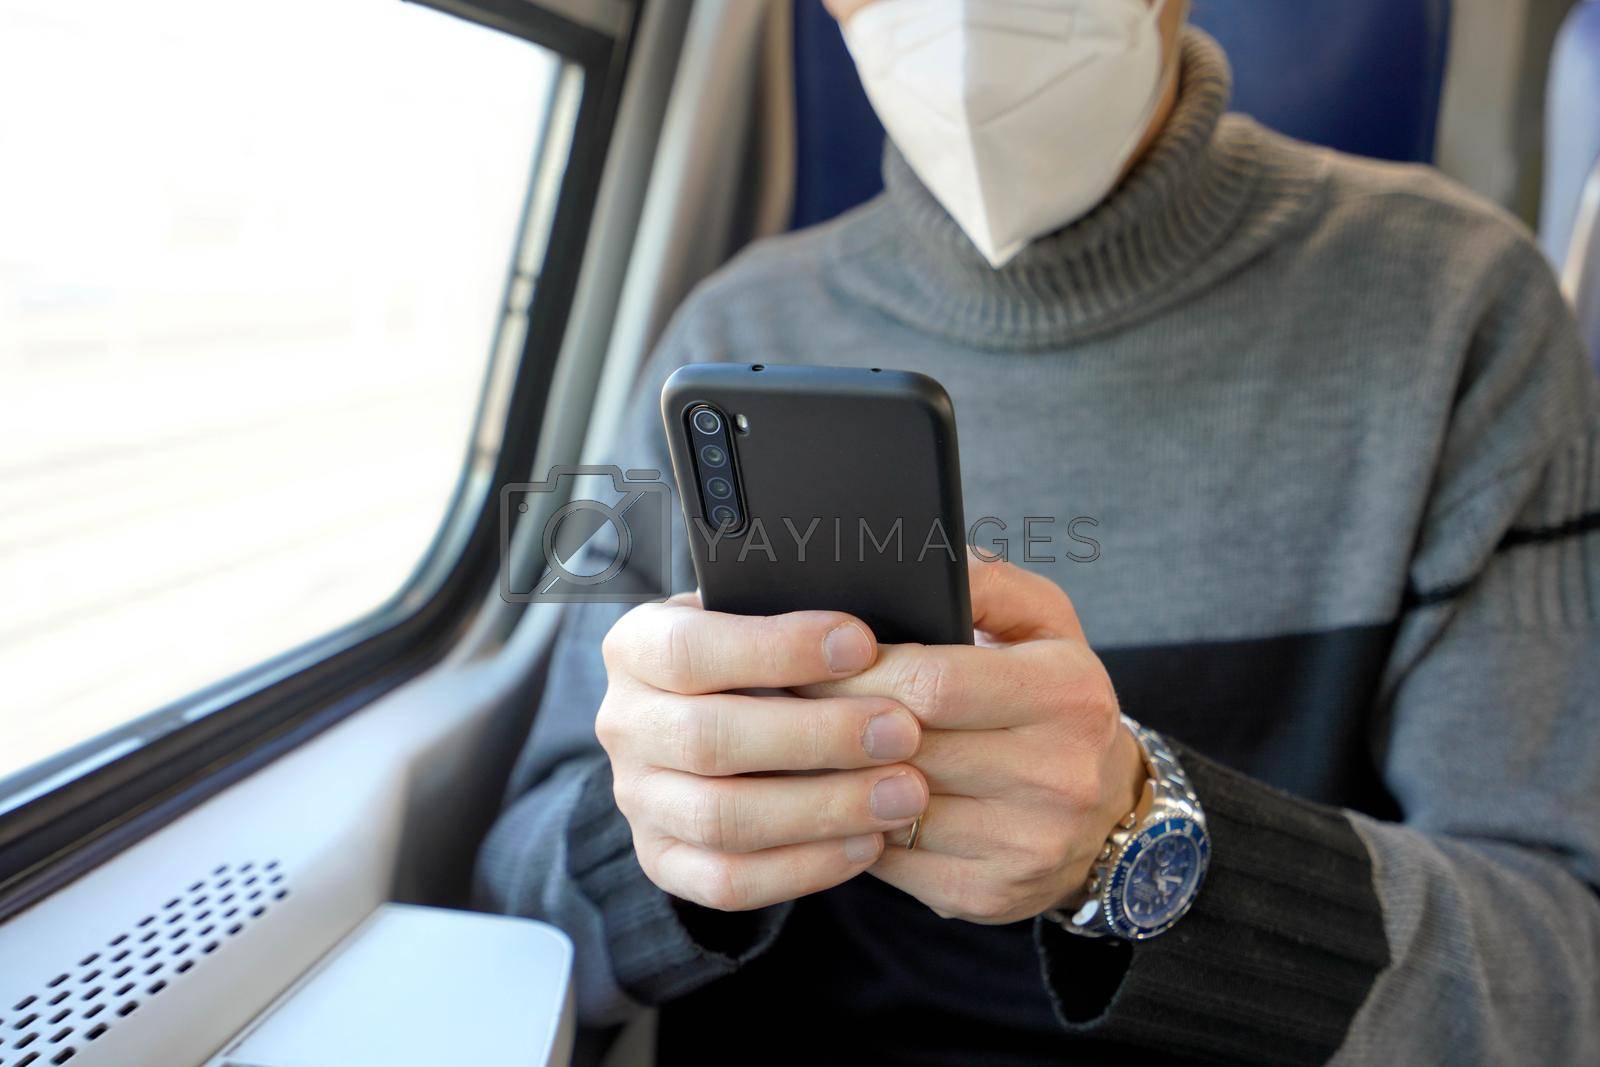 Royalty free image of Man on public transport using mobile app wearing medical face mask. Train commuter holding cellphone with mandatory protective mask KN95 FFP2. Focus on the phone. by sergio_monti